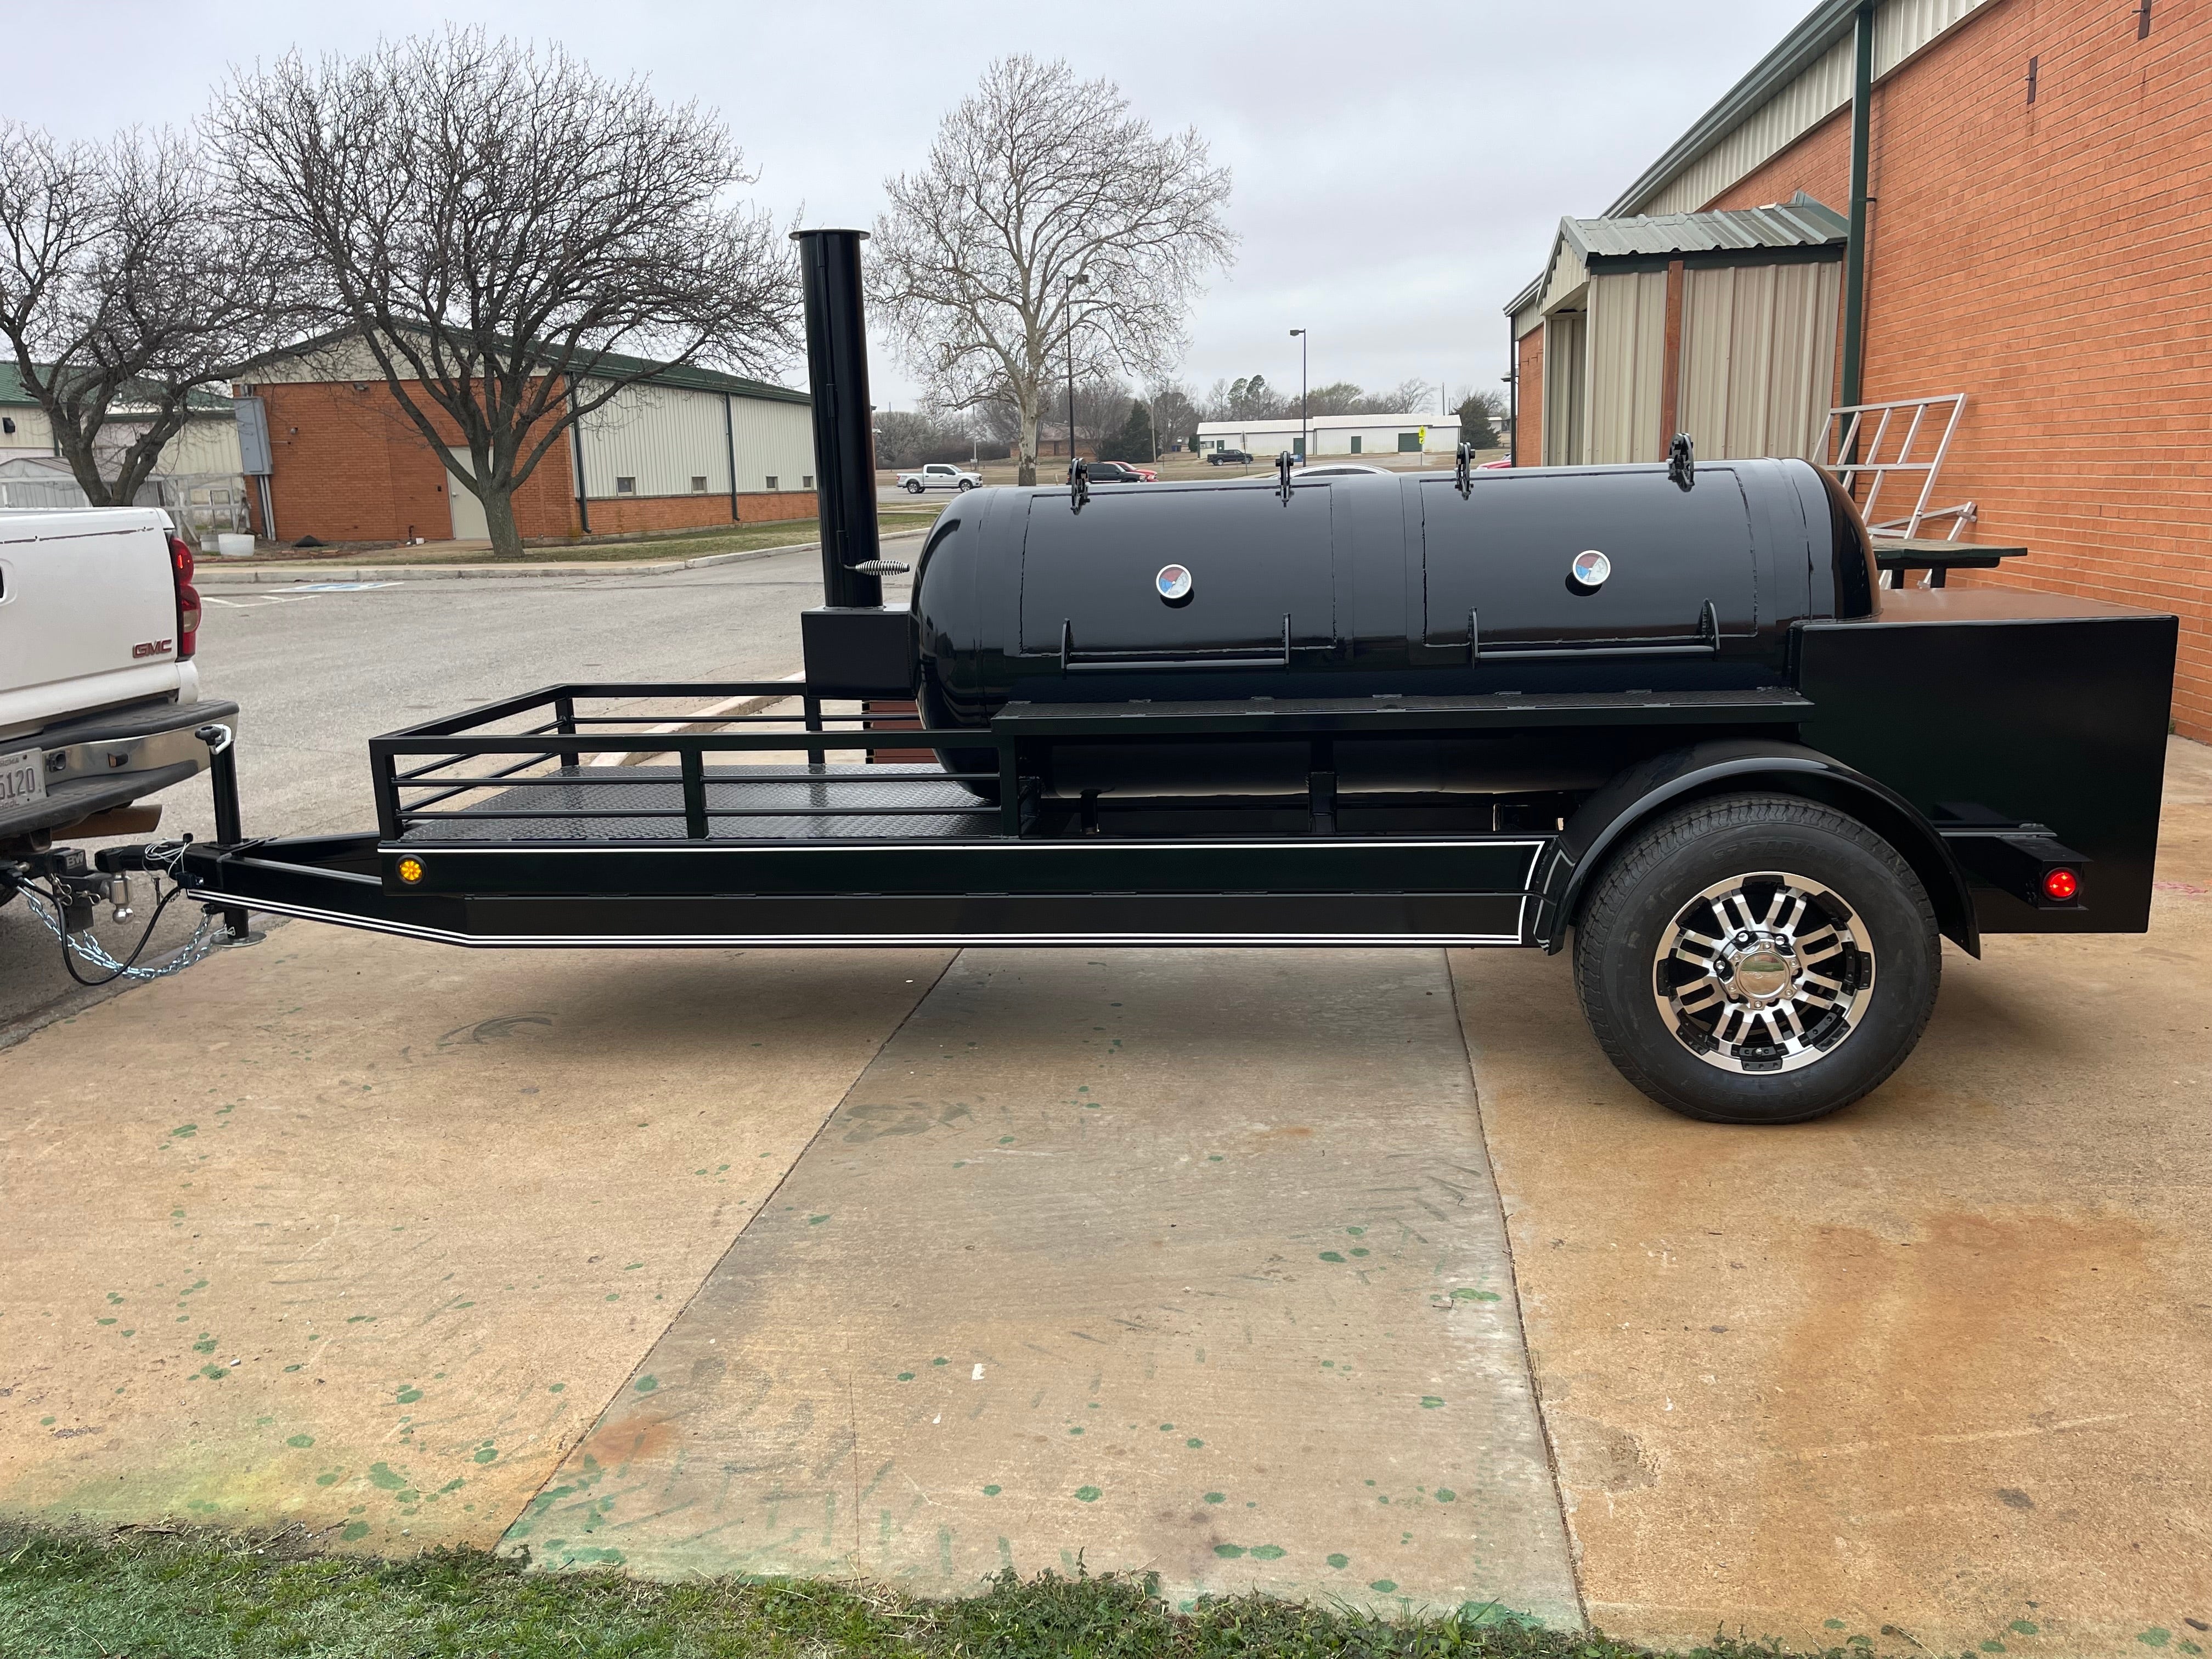 250 Gallon Offset Smoker- 30 Inch Diameter By 87 Inch Long Tank With Scoop Baffle